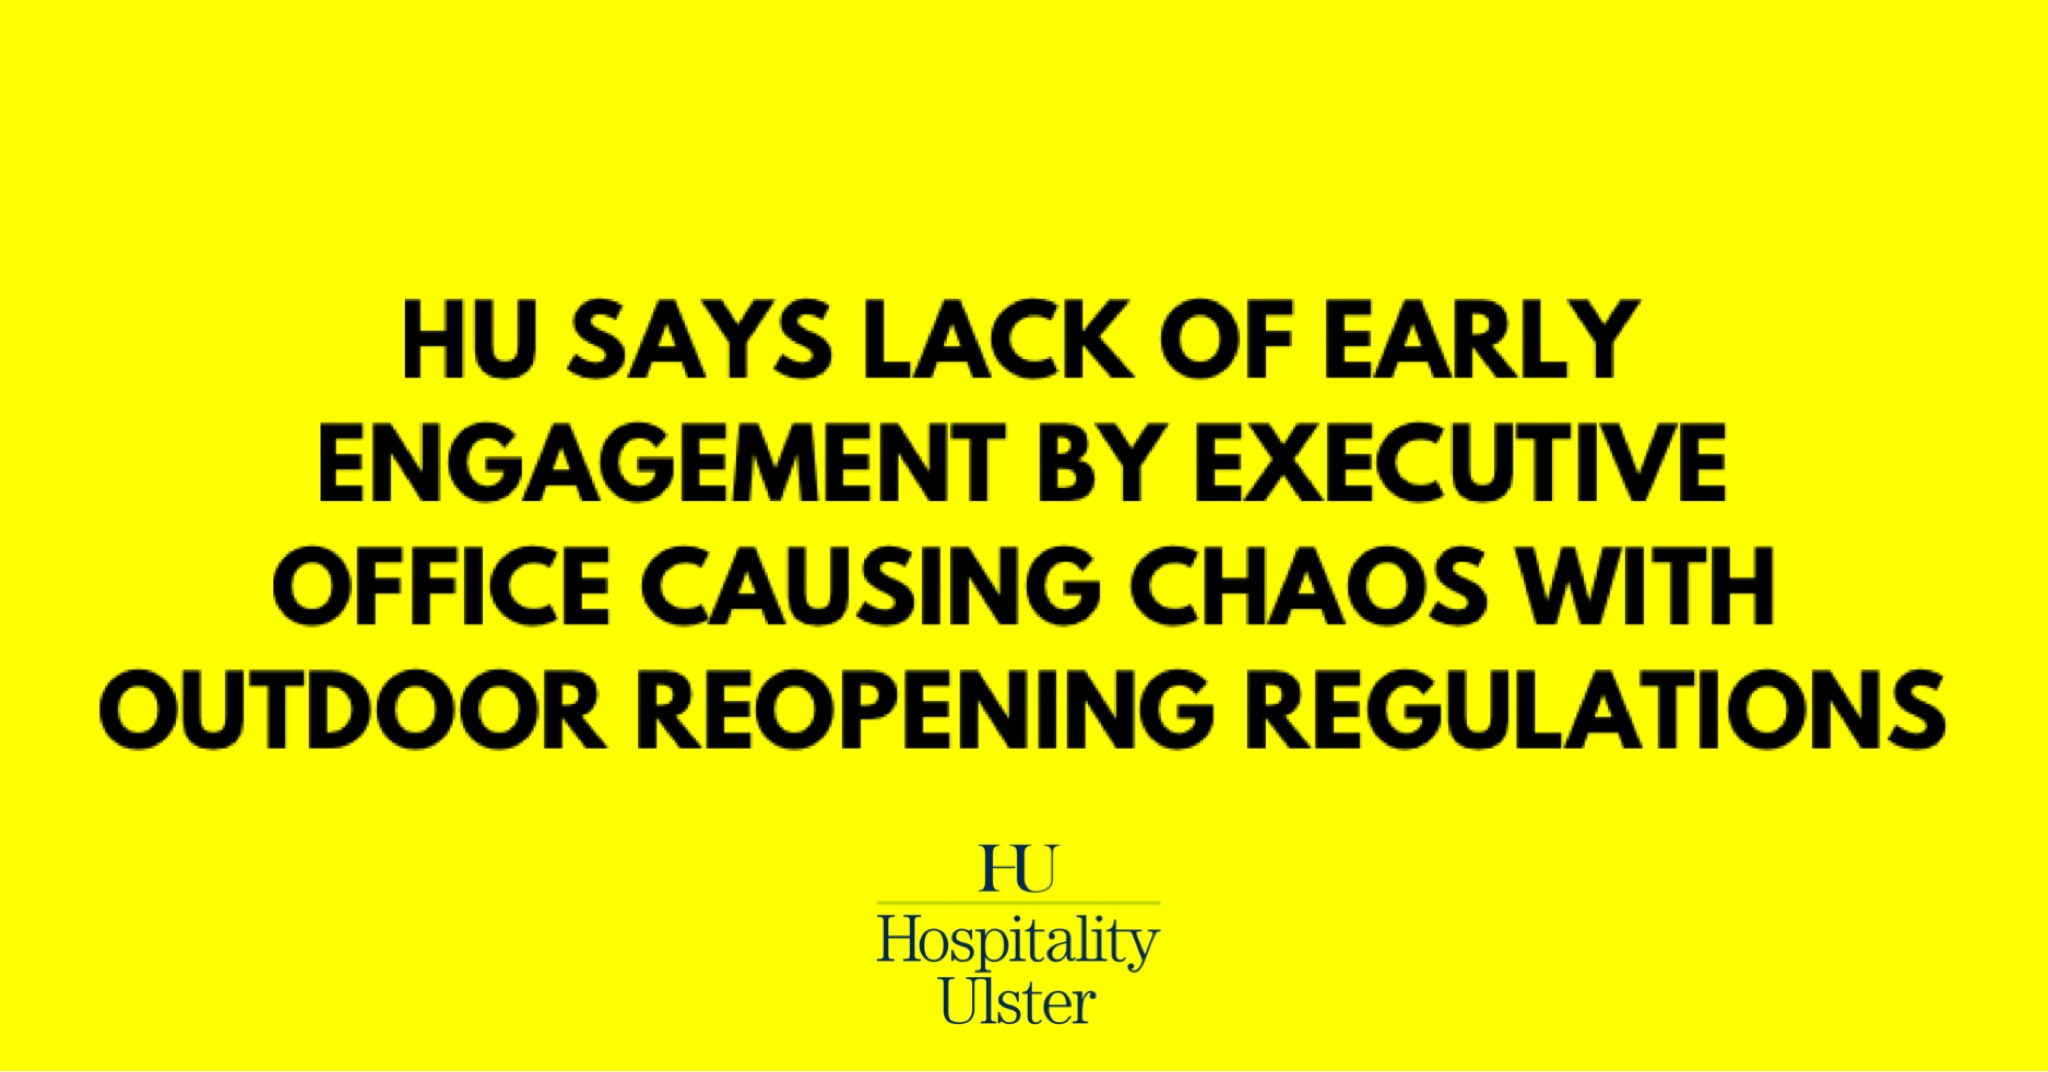 HU SAYS LACK OF EARLY ENGAGEMENT BY EXECUTIVE OFFICE CAUSING CHAOS WITH OUTDOOR REOPENING REGS